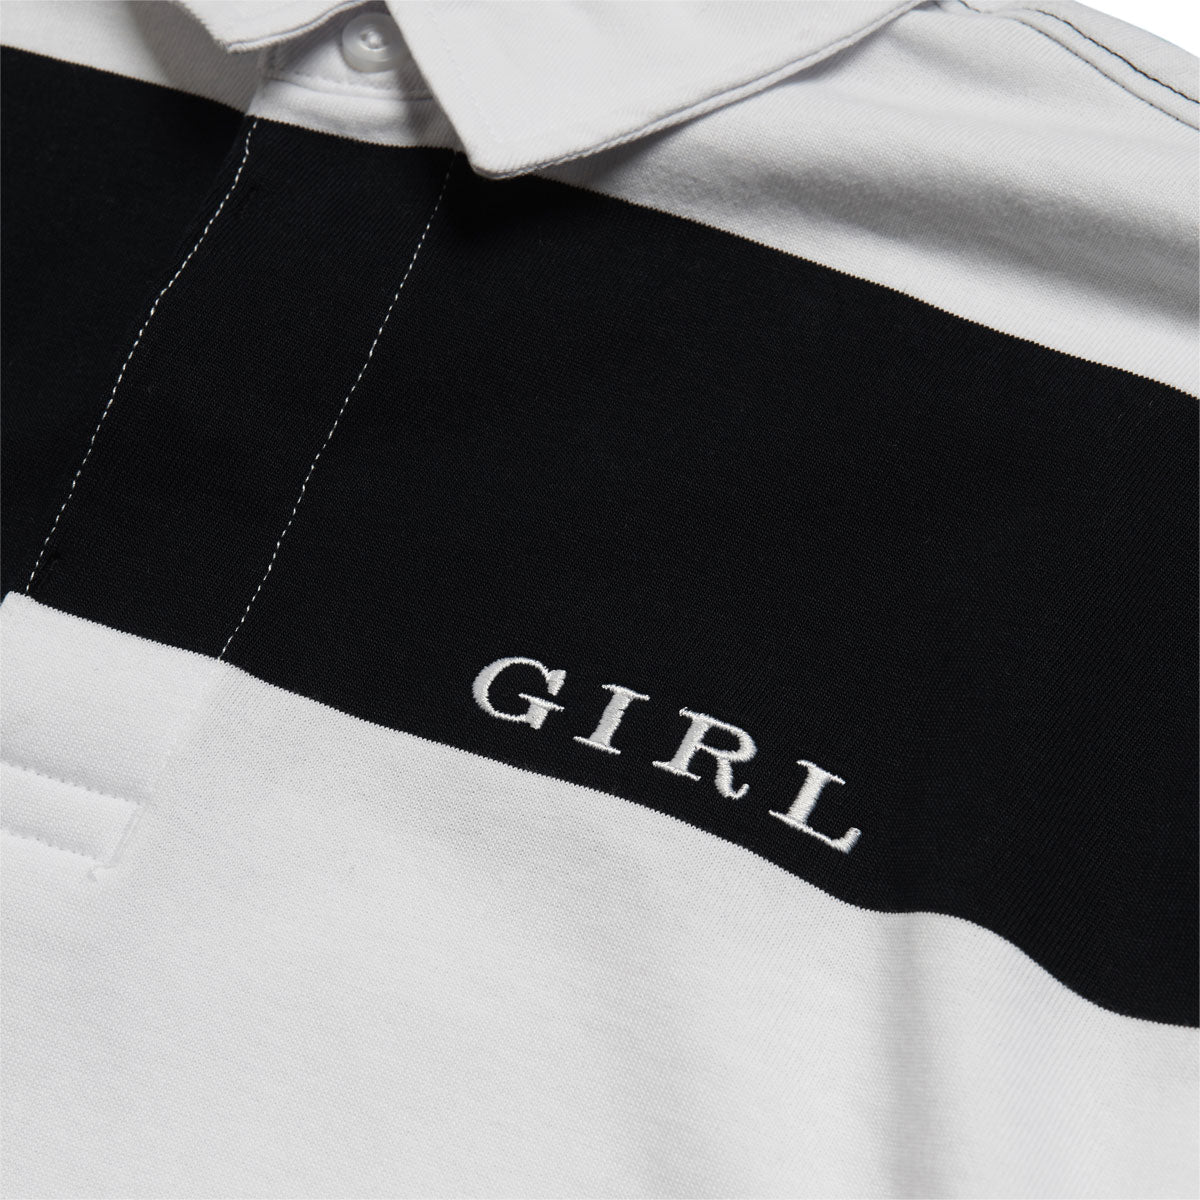 Girl Serif Rugby Jersey - White/Navy image 3